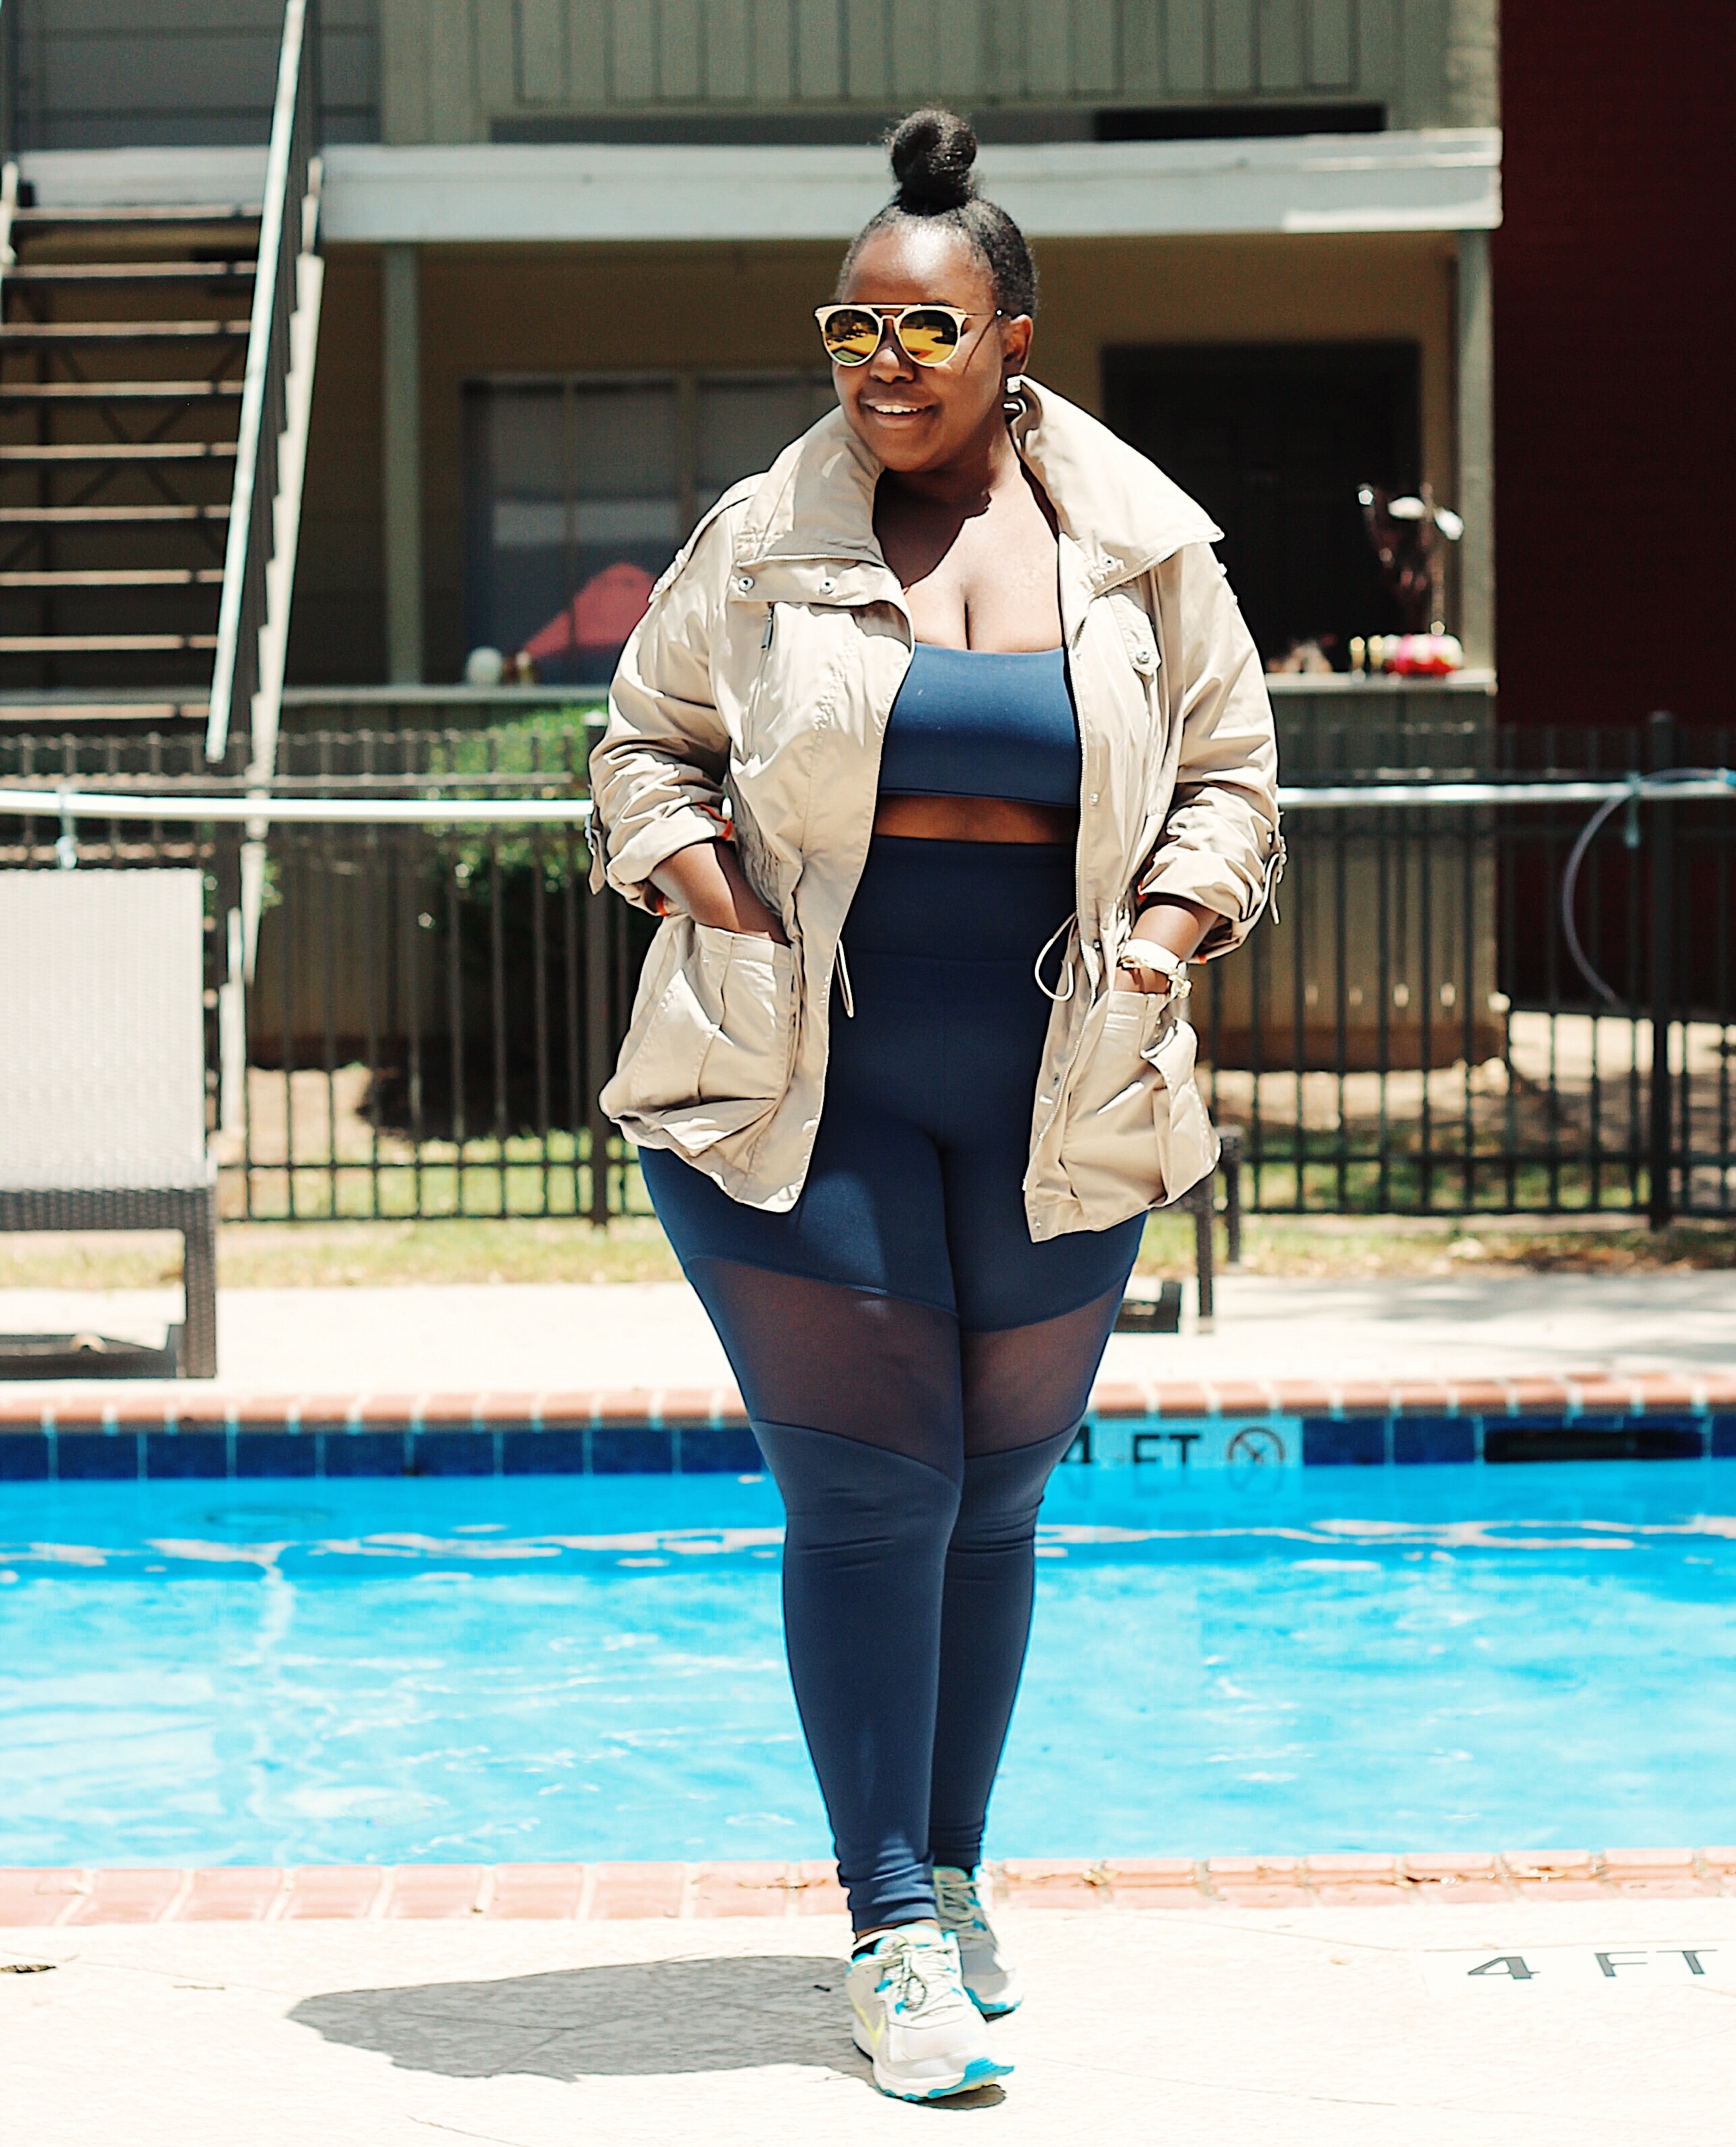 plus size black bloggers, clothes for curvy girls, curvy girl fashion clothing, plus blog, plus size fashion tips, plus size women blog, at fashion blog, plus size high fashion, curvy women fashion, plus blog, curvy girl fashion blog, style plus curves, plus size fashion instagram, curvy girl blog, bbw blog, plus size street fashion, plus size beauty blog, plus size fashion ideas, curvy girl summer outfits, plus size fashion magazine, plus fashion bloggers, boohoo, rebdolls bodycon maxi dresses, plus size athleisure